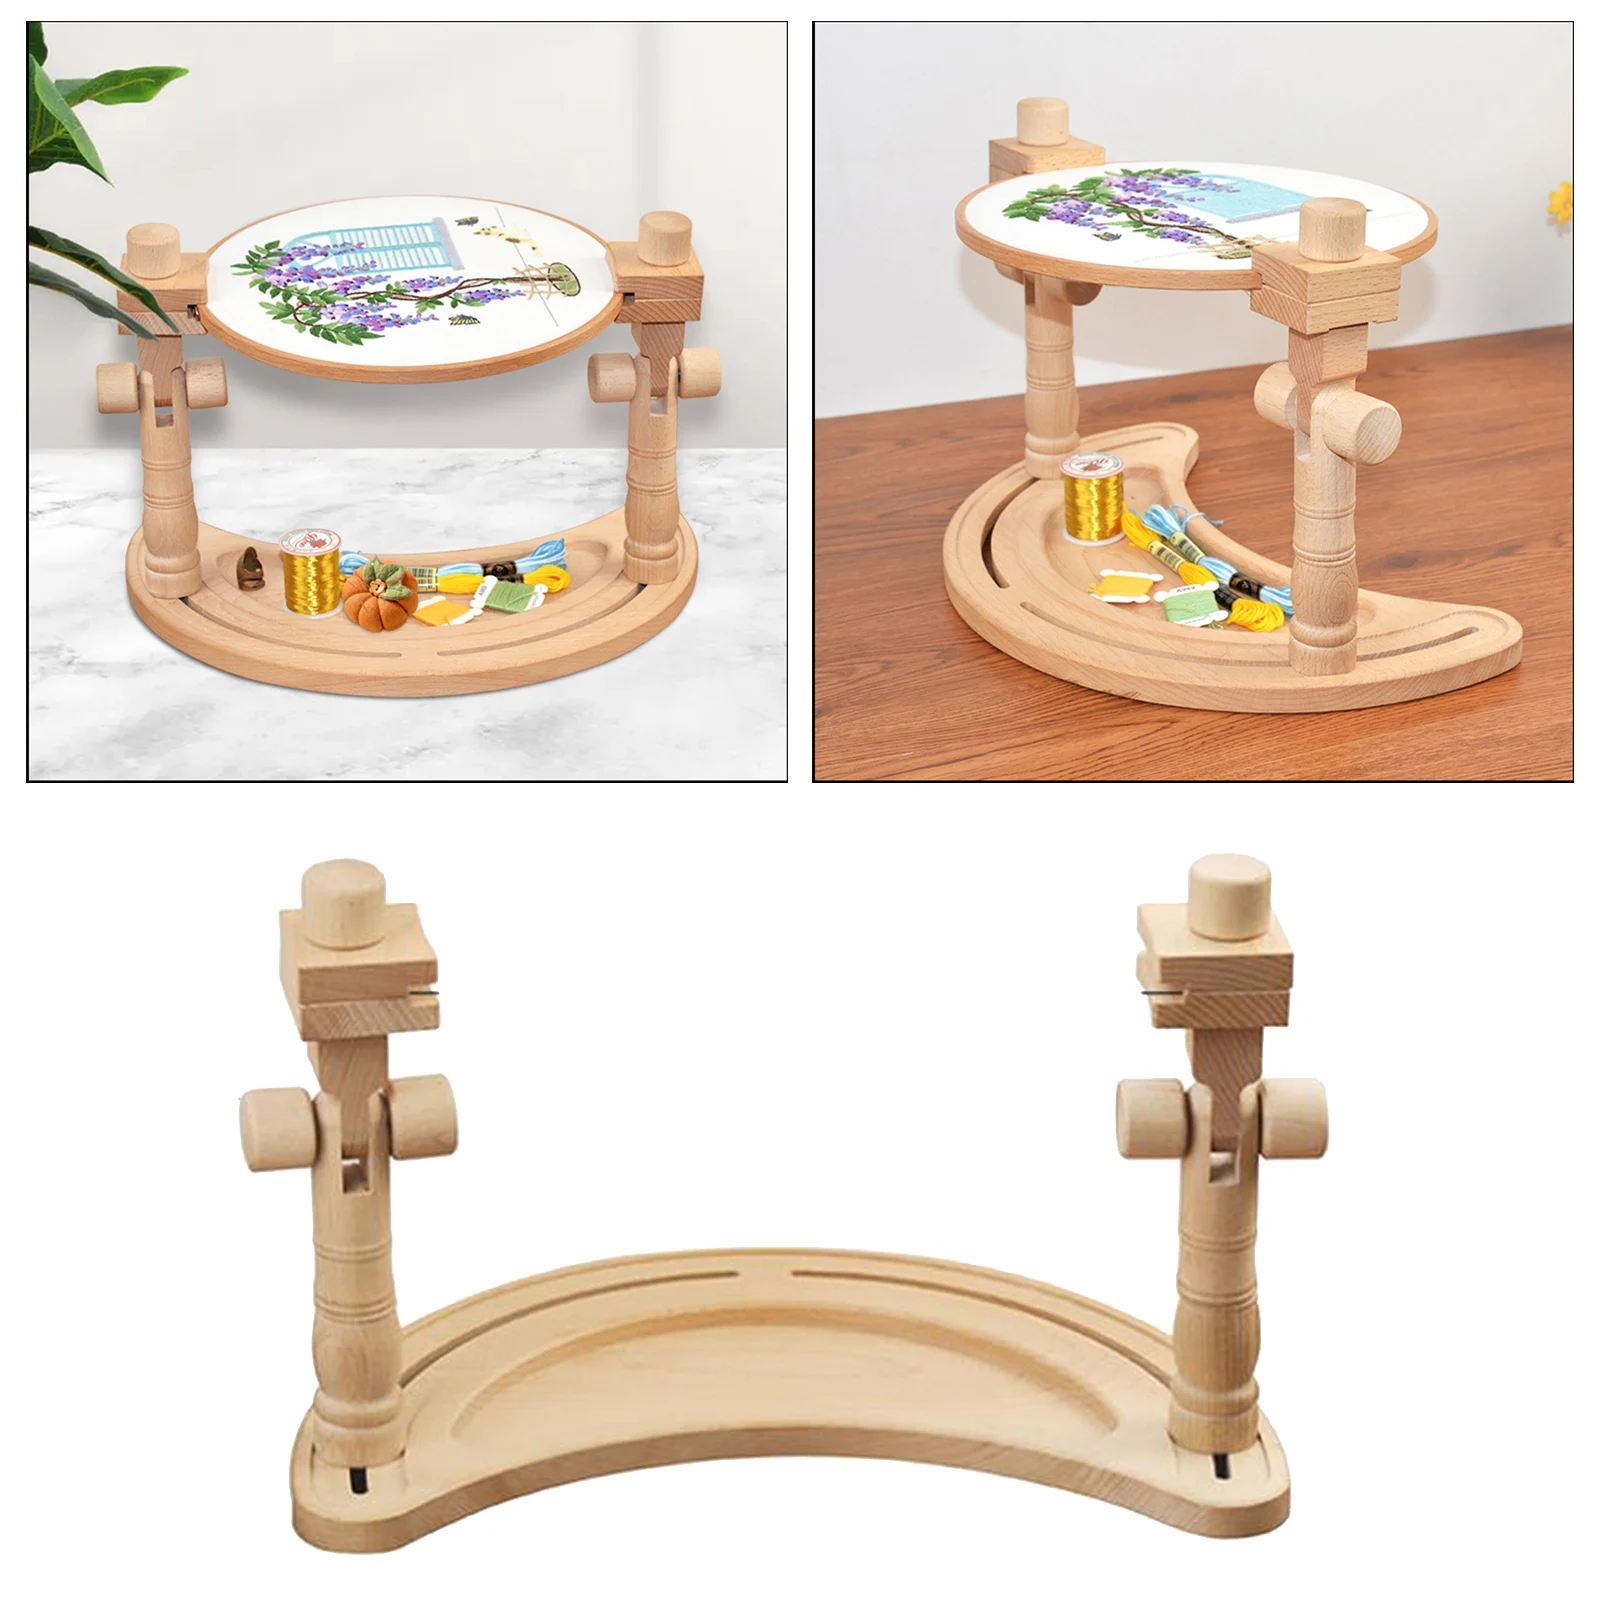 Retro Style Rotating Wooden Needlework Table Rack Tabletop Embroidery Stitchwork Rotate Sewing Holder